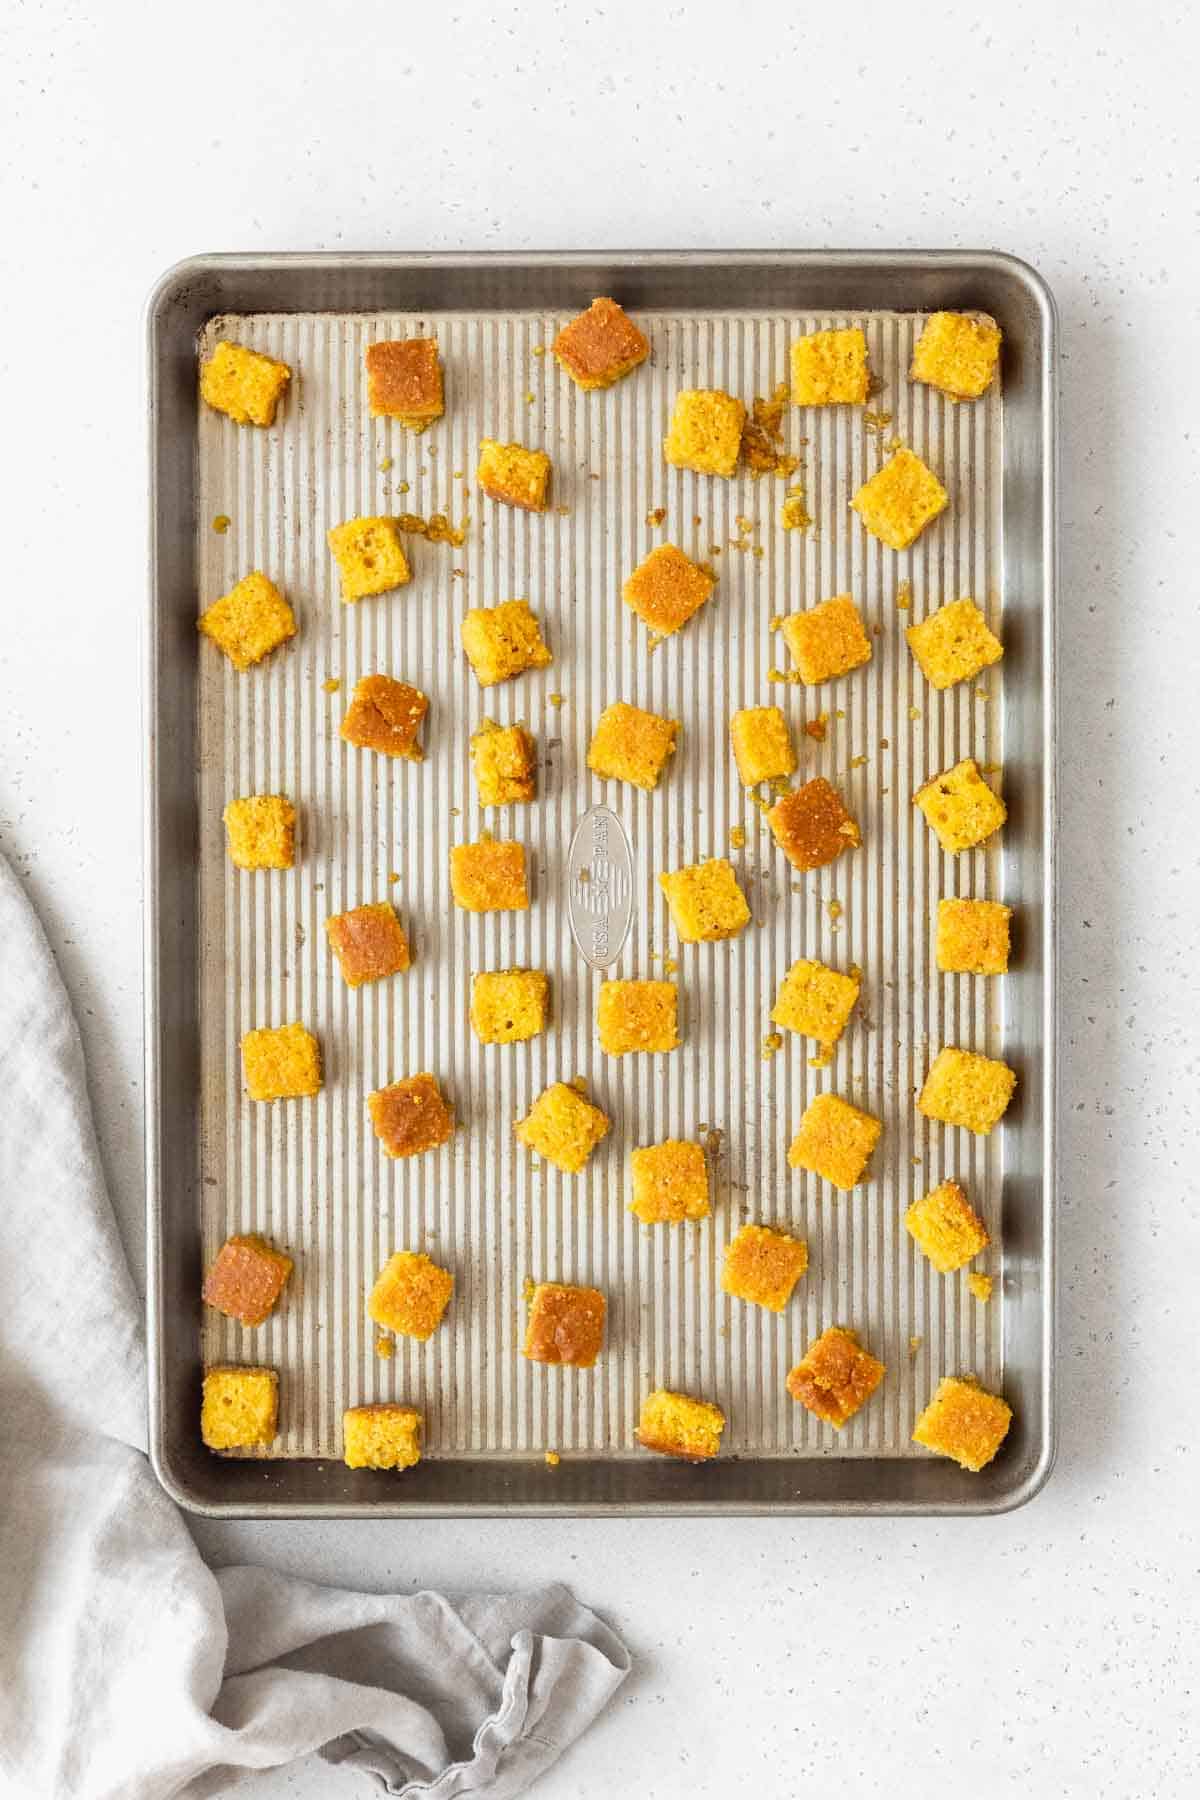 The cornbread croutons on a rimmed cookie sheet before baking.